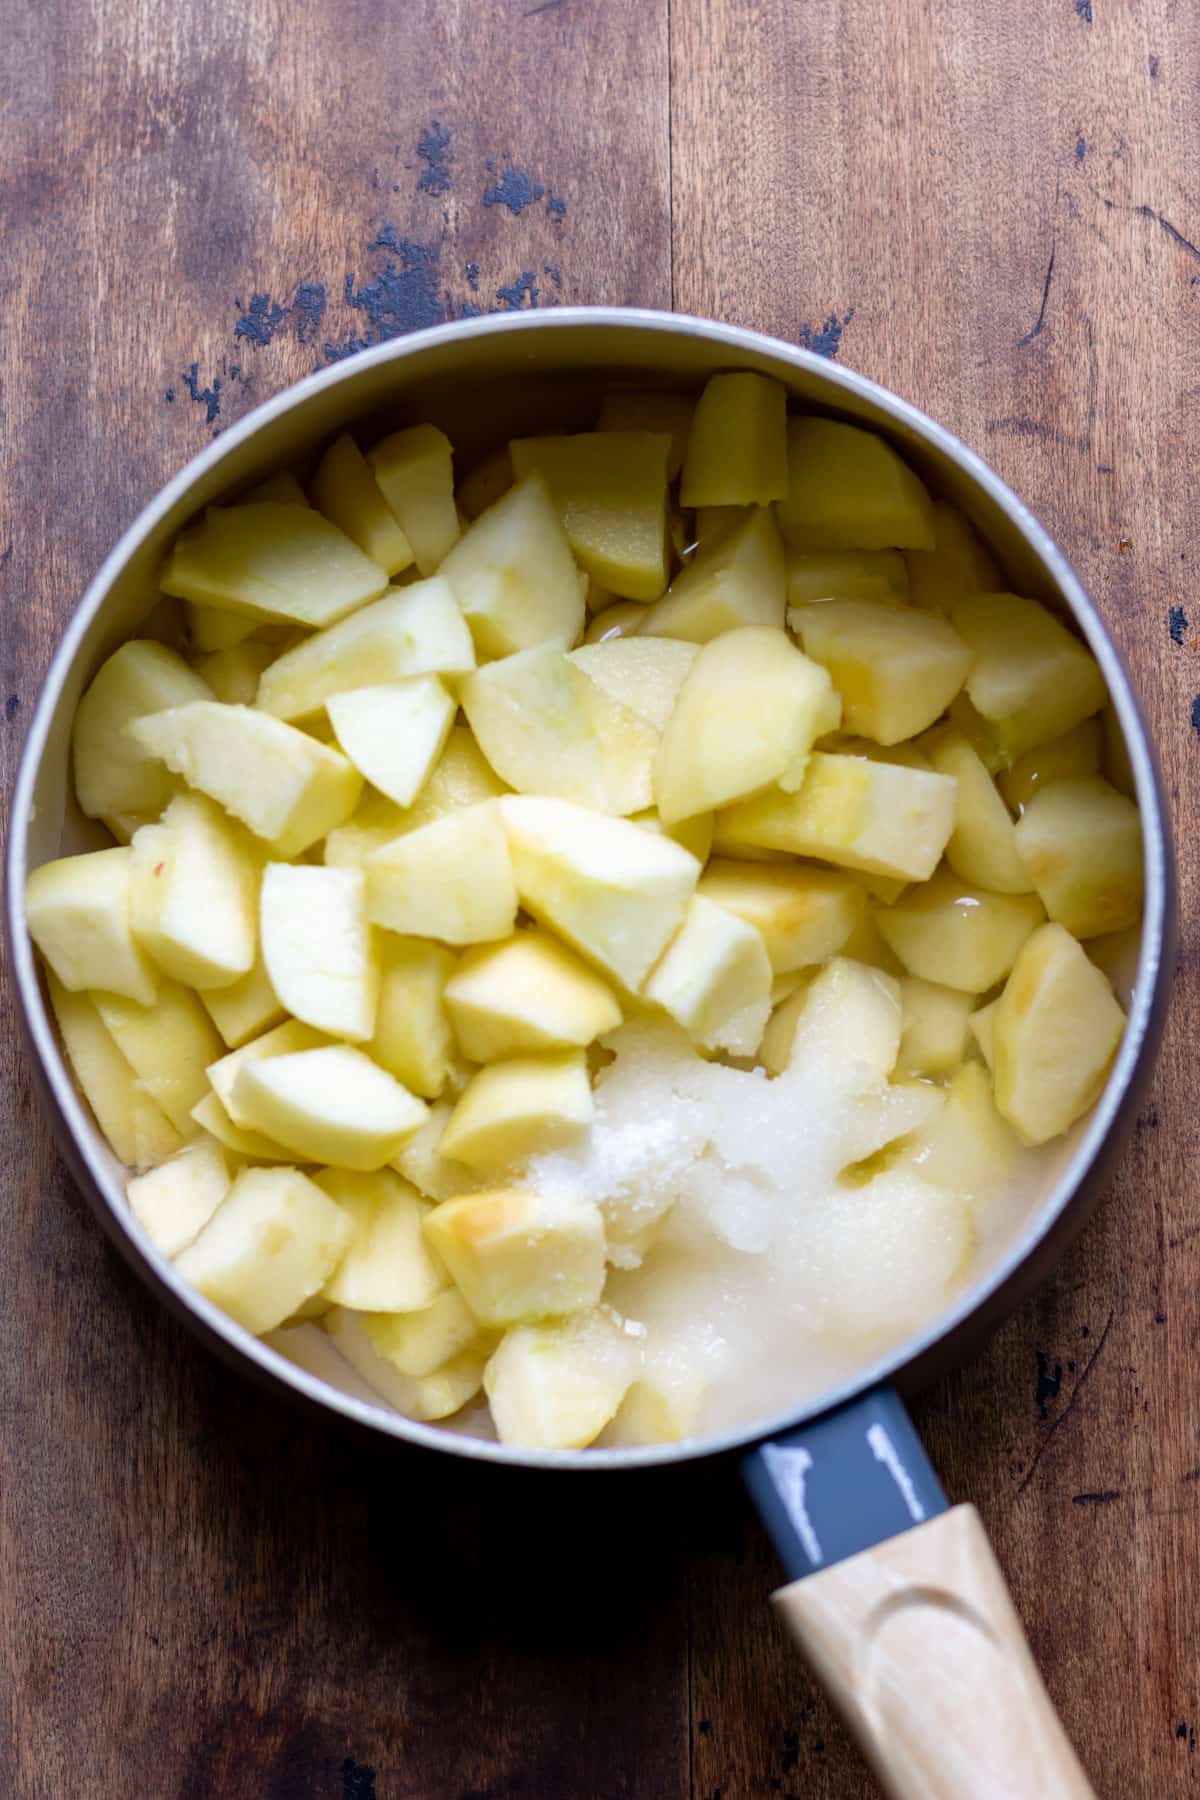 Pot with slices of apple and sugar.